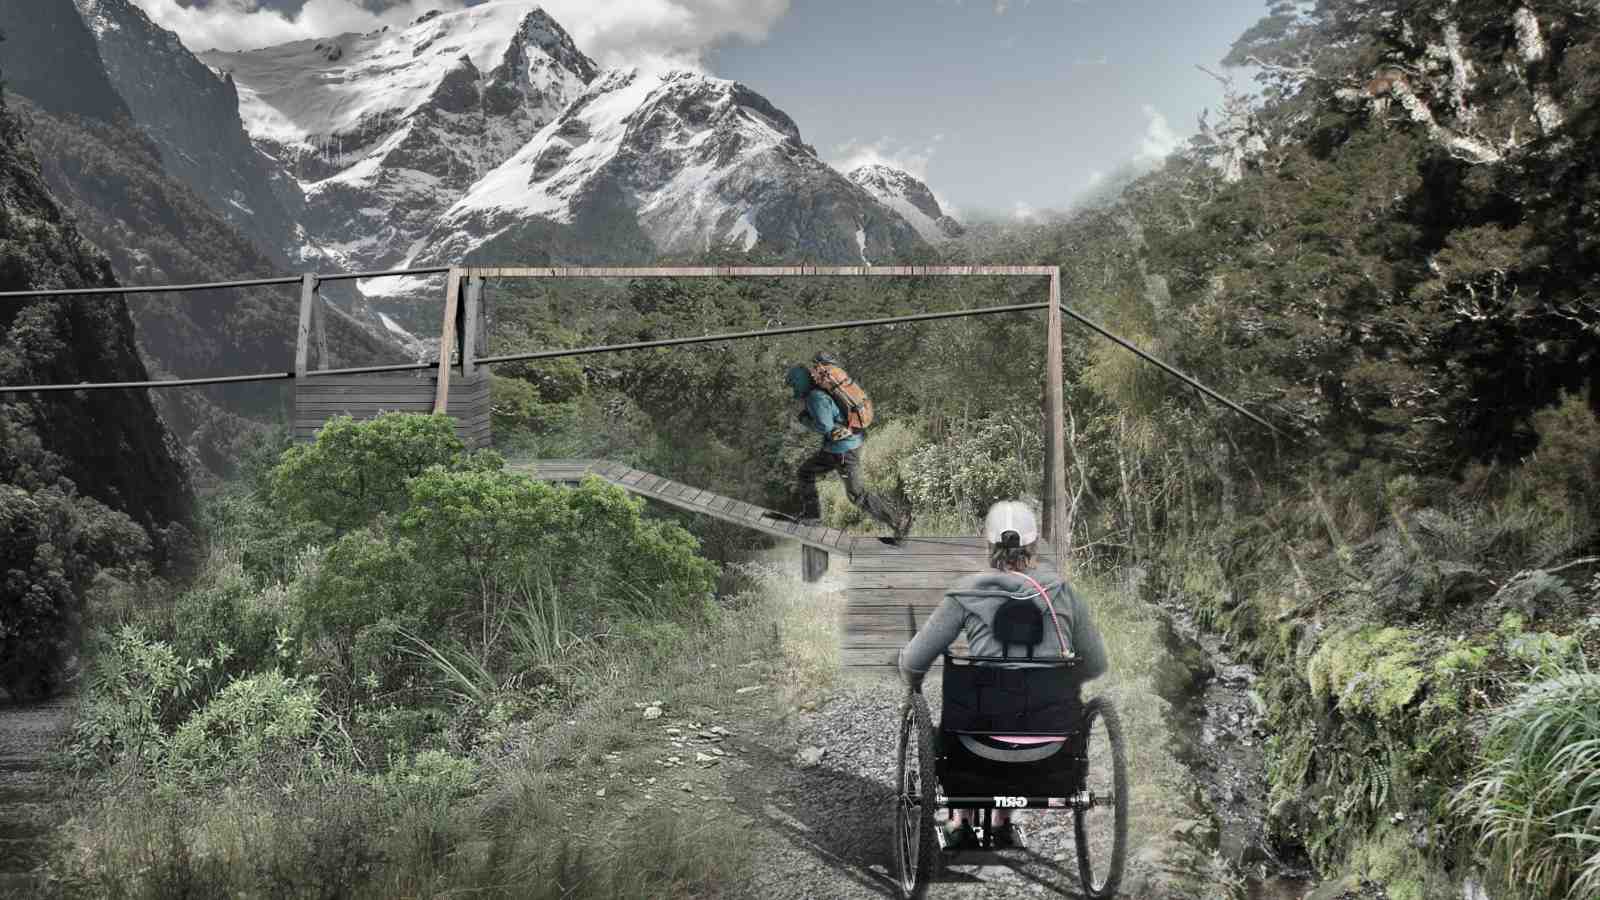 An image of the wilderness, showing snow capped mountains in the background. In the foreground is a tramping track with a wheelchair user and an able-bodied walker.